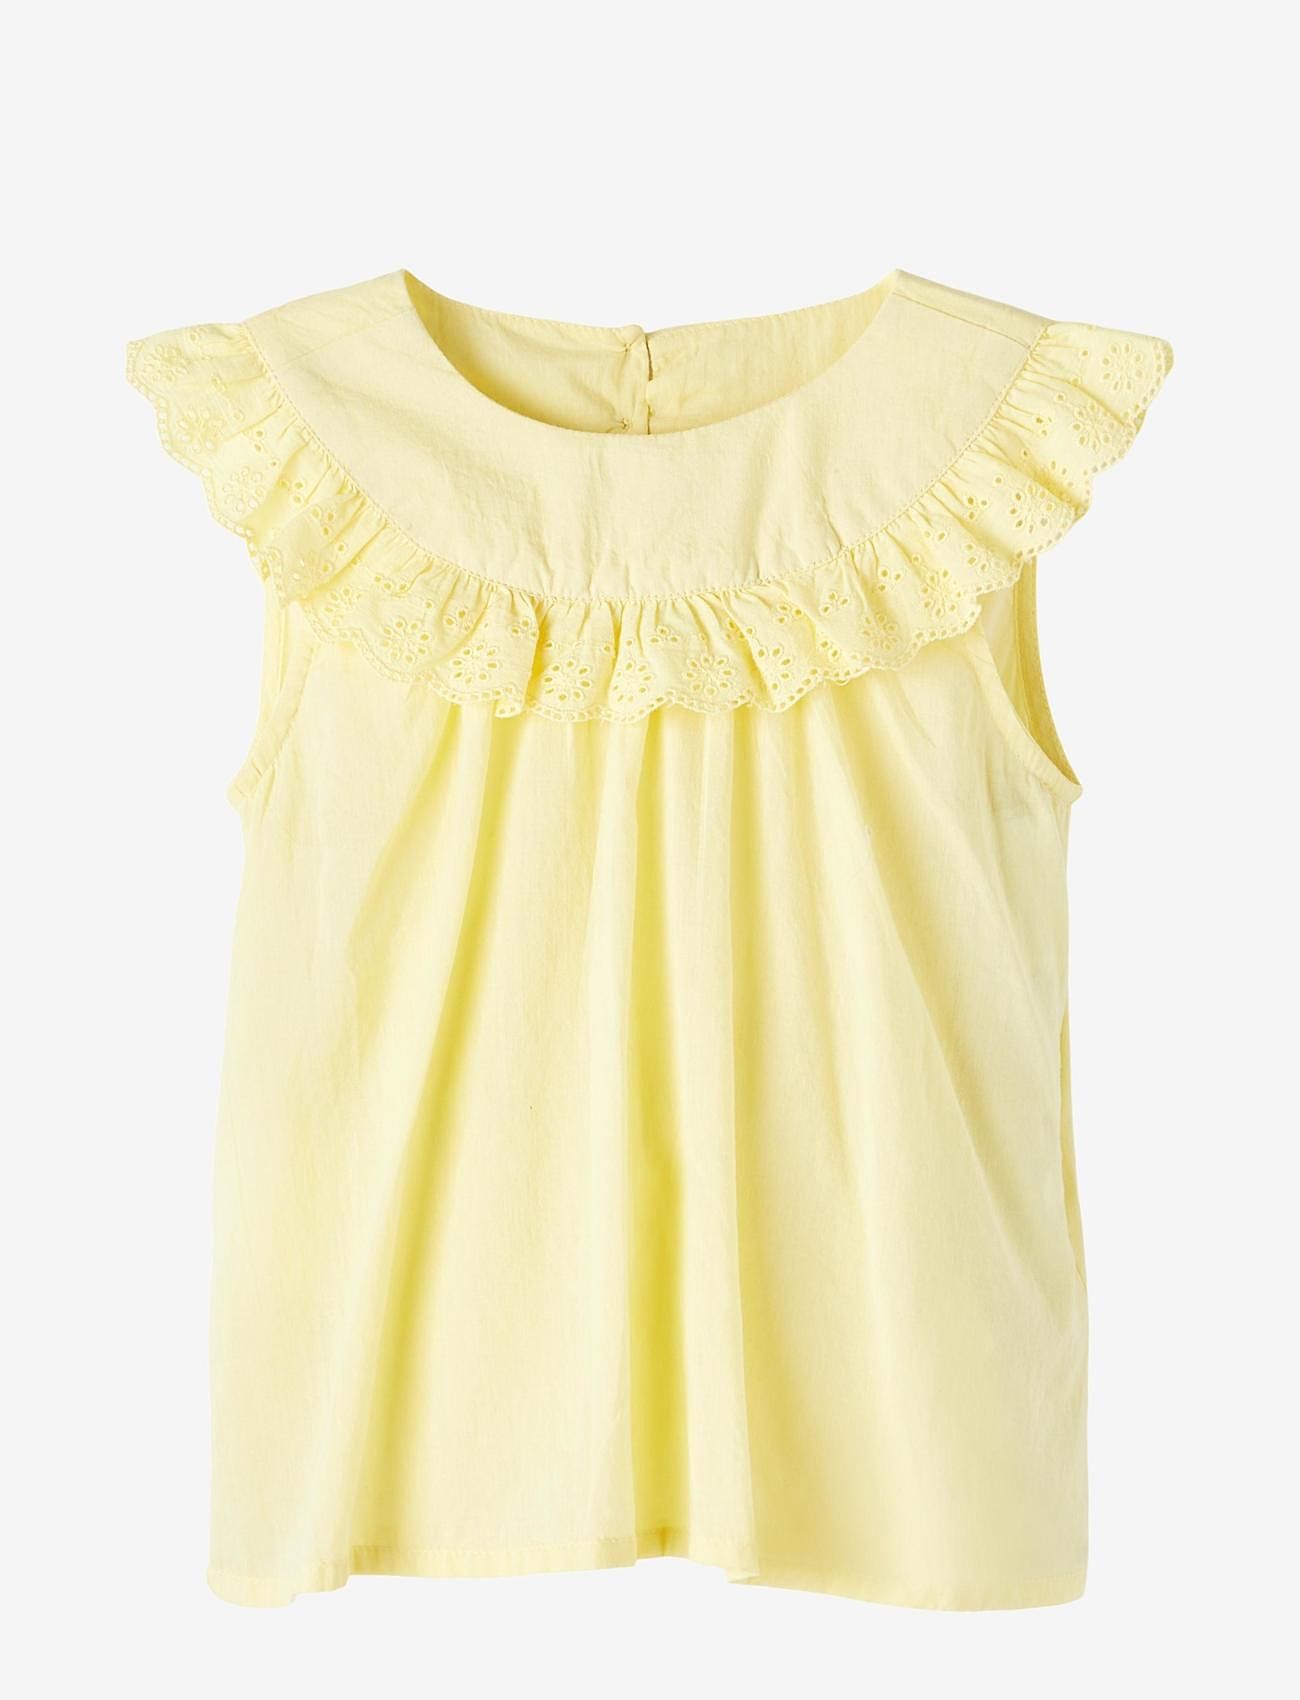 name it - NMFFETULLE TOP - sommerschnäppchen - pineapple slice - 0